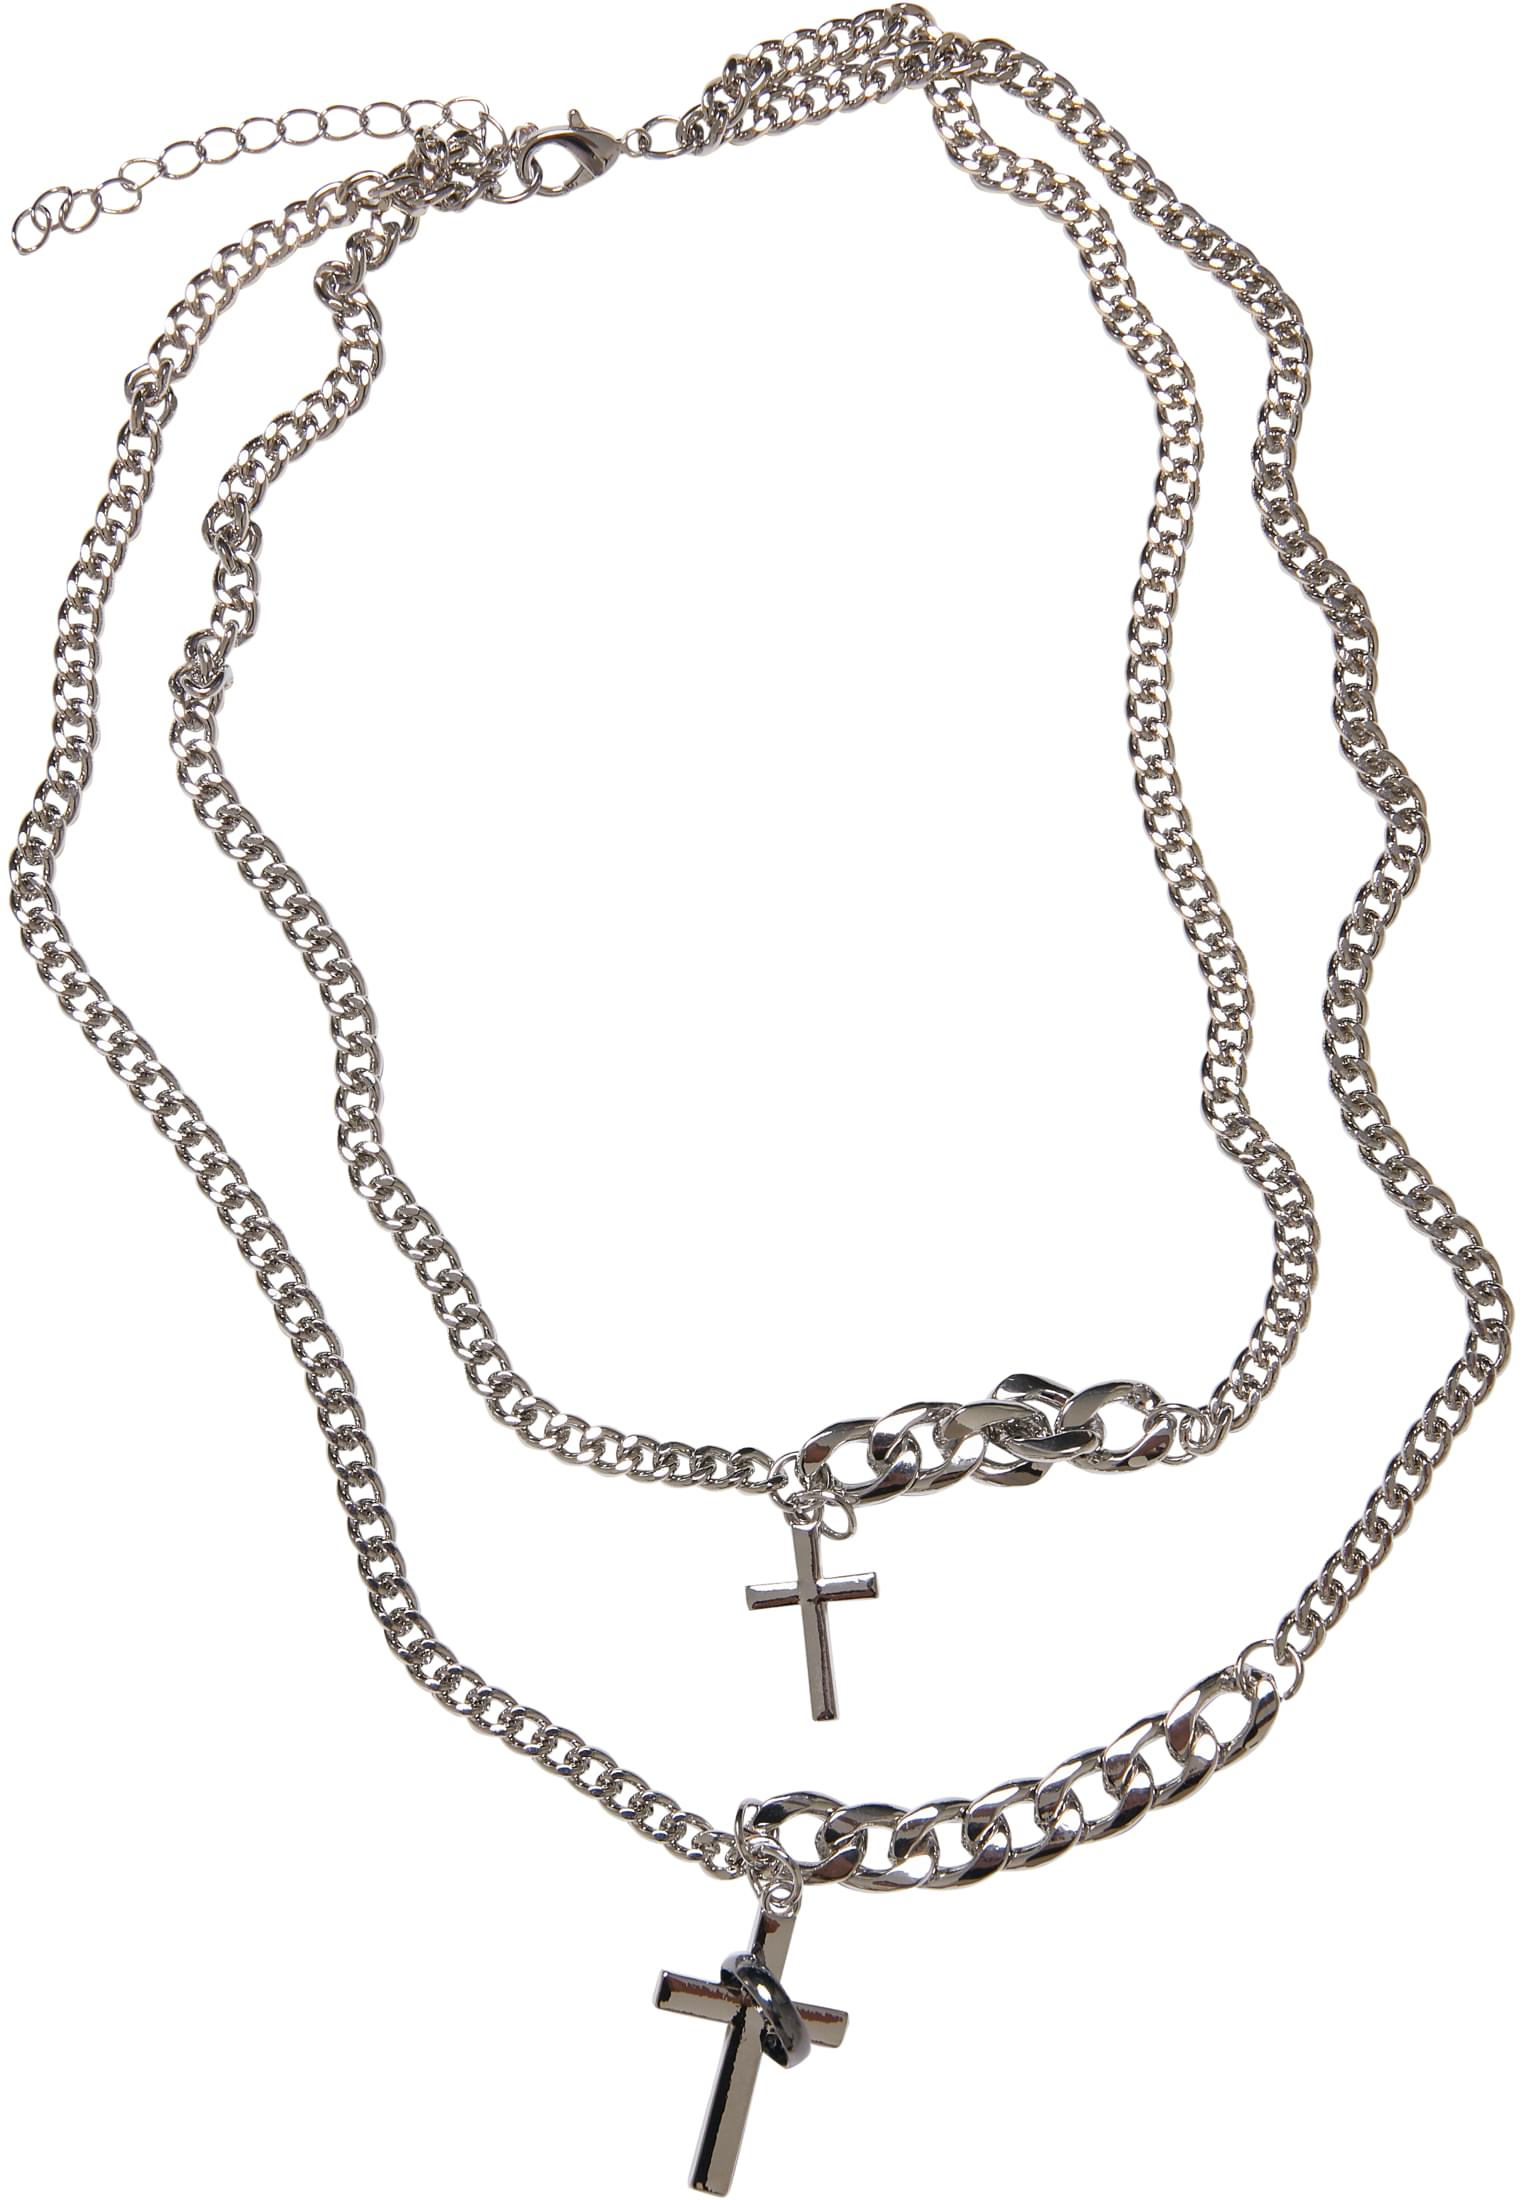 Necklace with various chains - silver colors